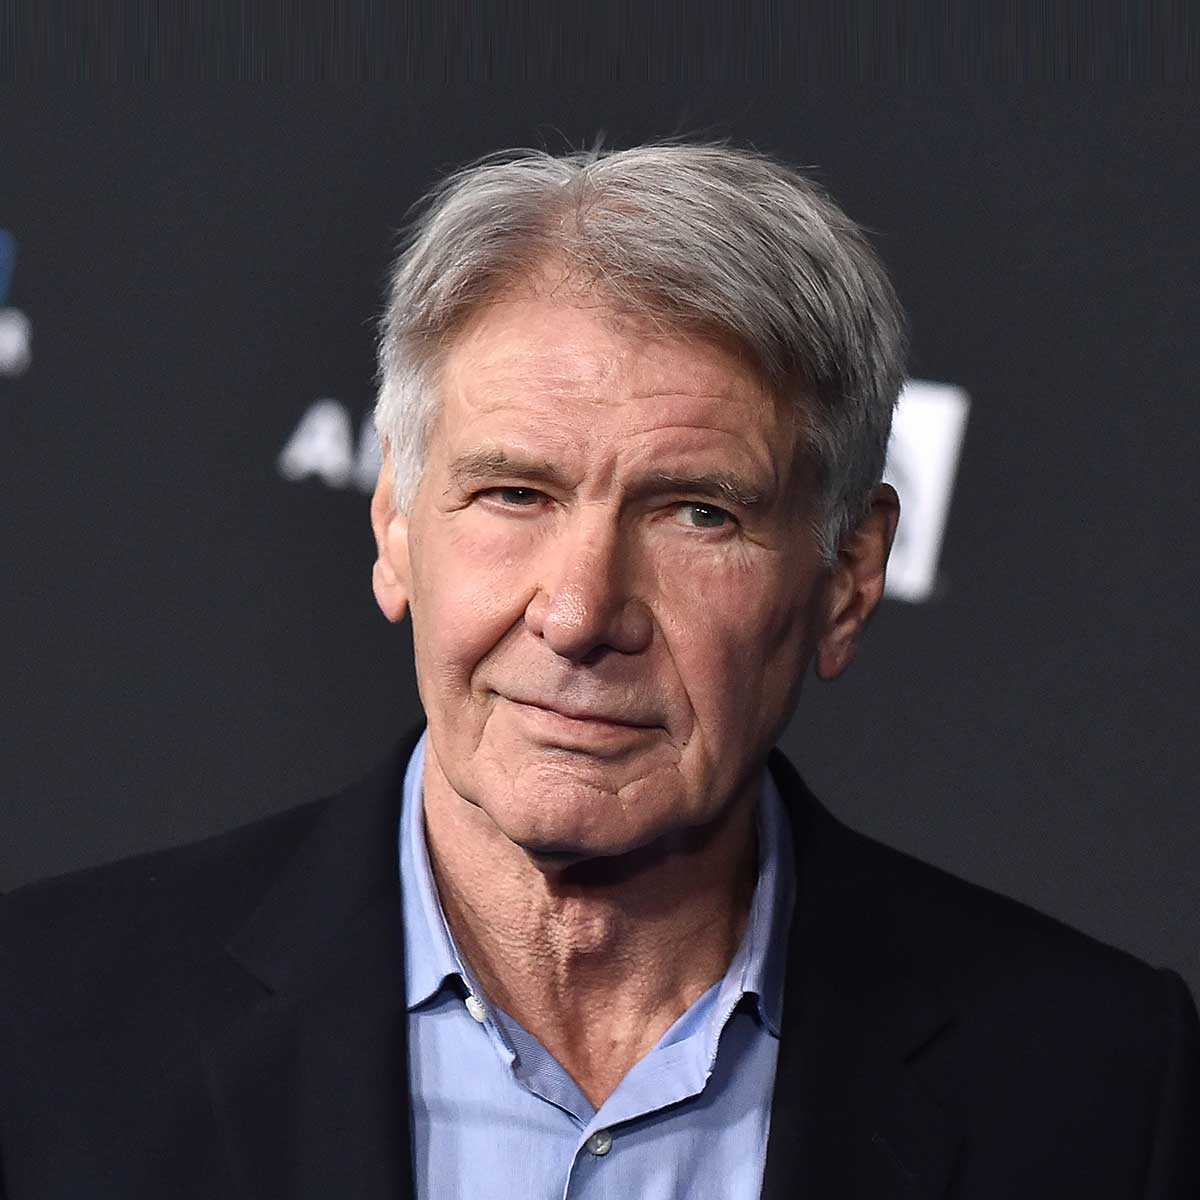 <p>Harrison Ford (Source: National Today)</p>